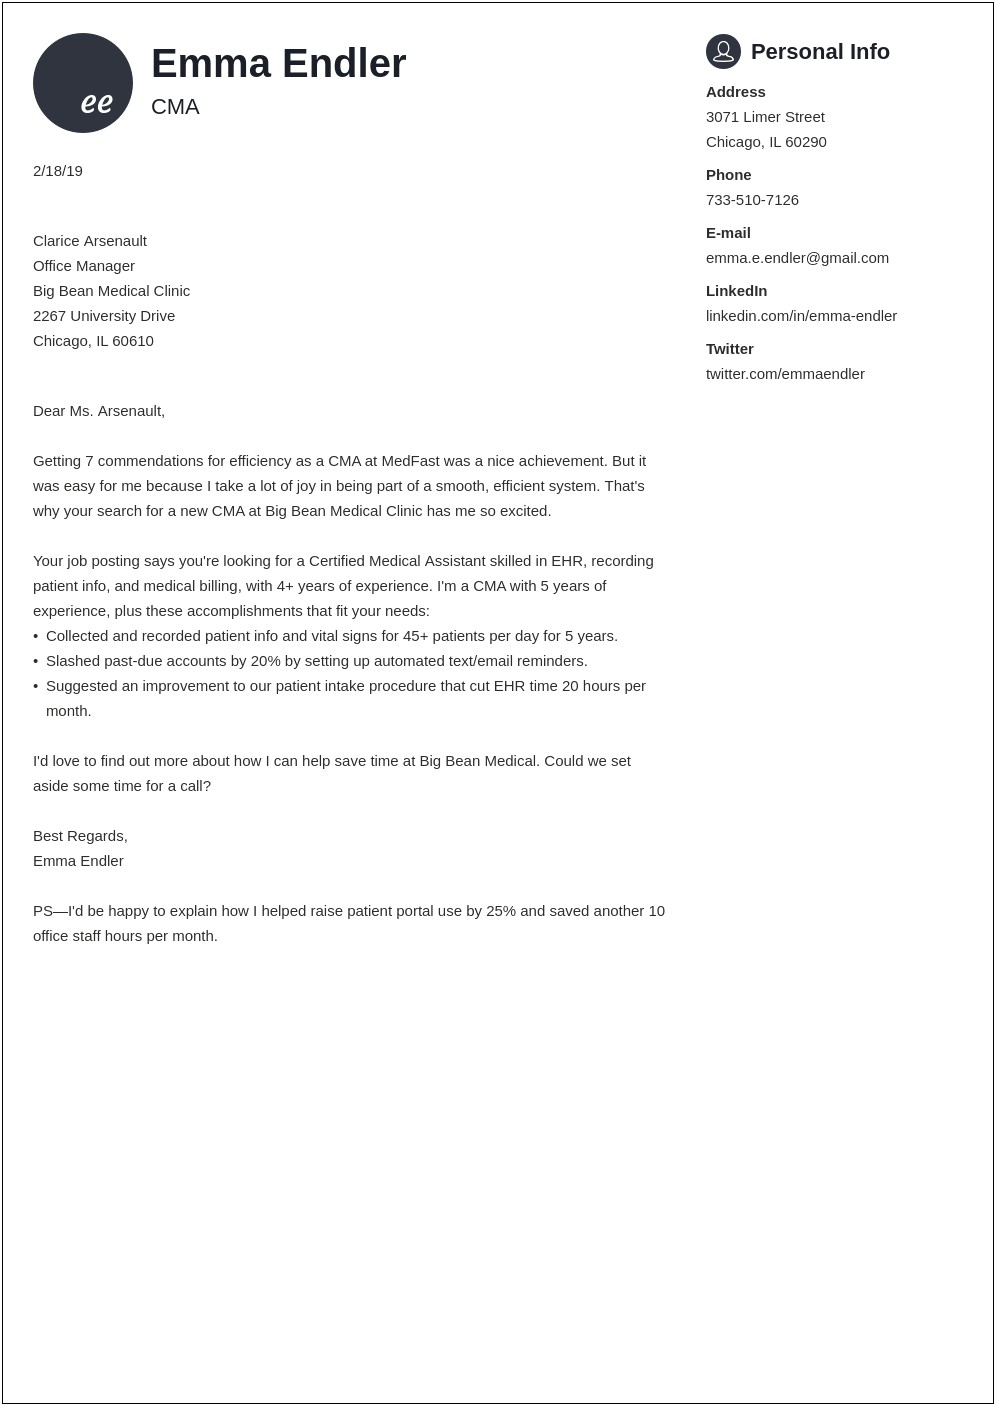 Email To Accompany Cover Letter And Resume